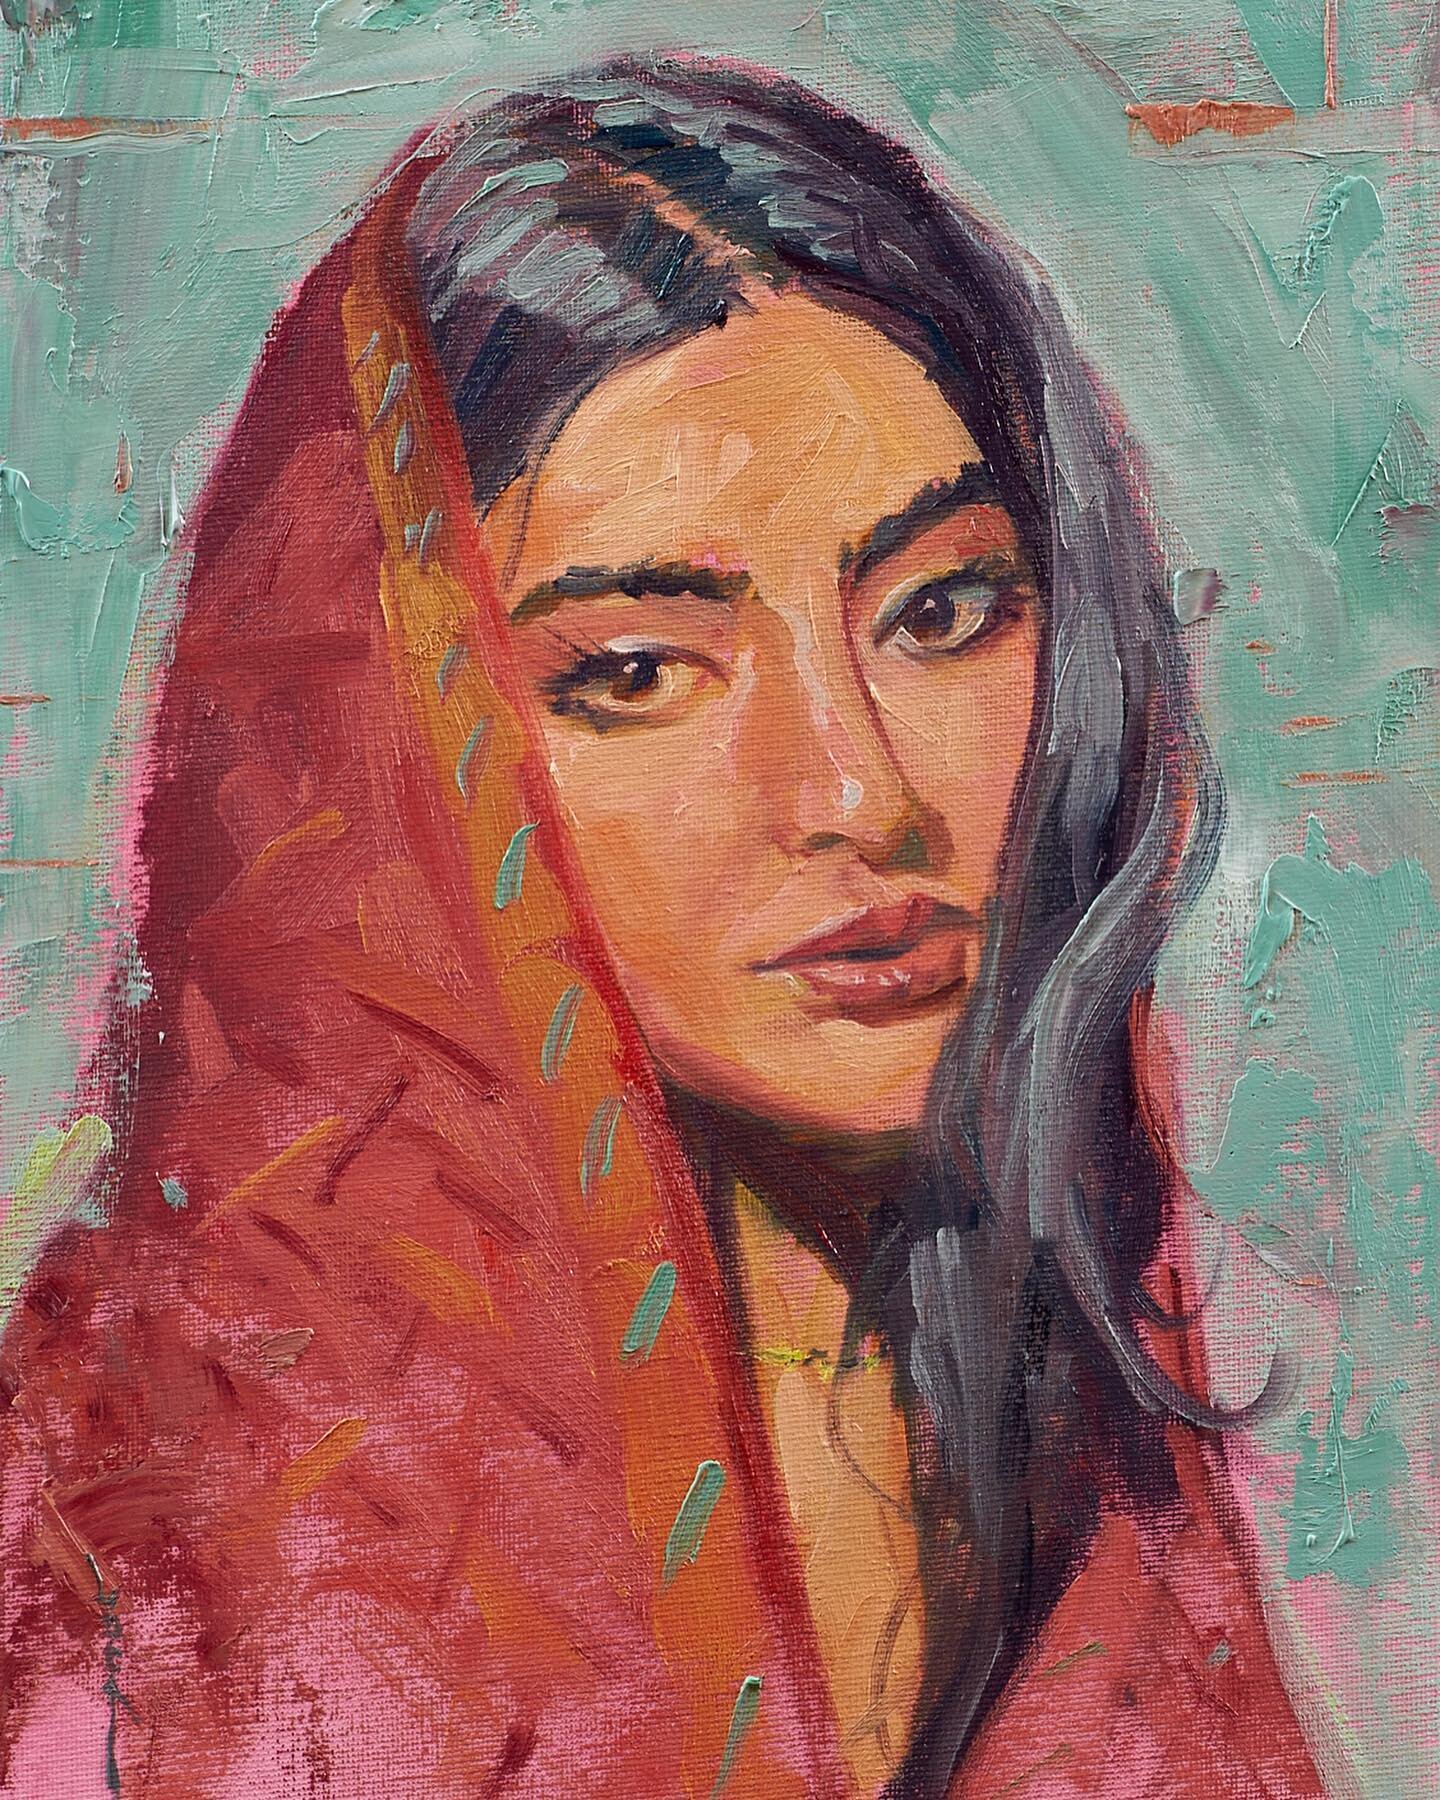 Last night&rsquo;s warm up painting, the wonderful @iffat.marash using a red undertone to paint with to get ready for Thursday&rsquo;s LIVE PAINTING demo Art WAR on @mastrius.official . https://www.mastrius.com/product/master-art-battle-doug-clarke-v